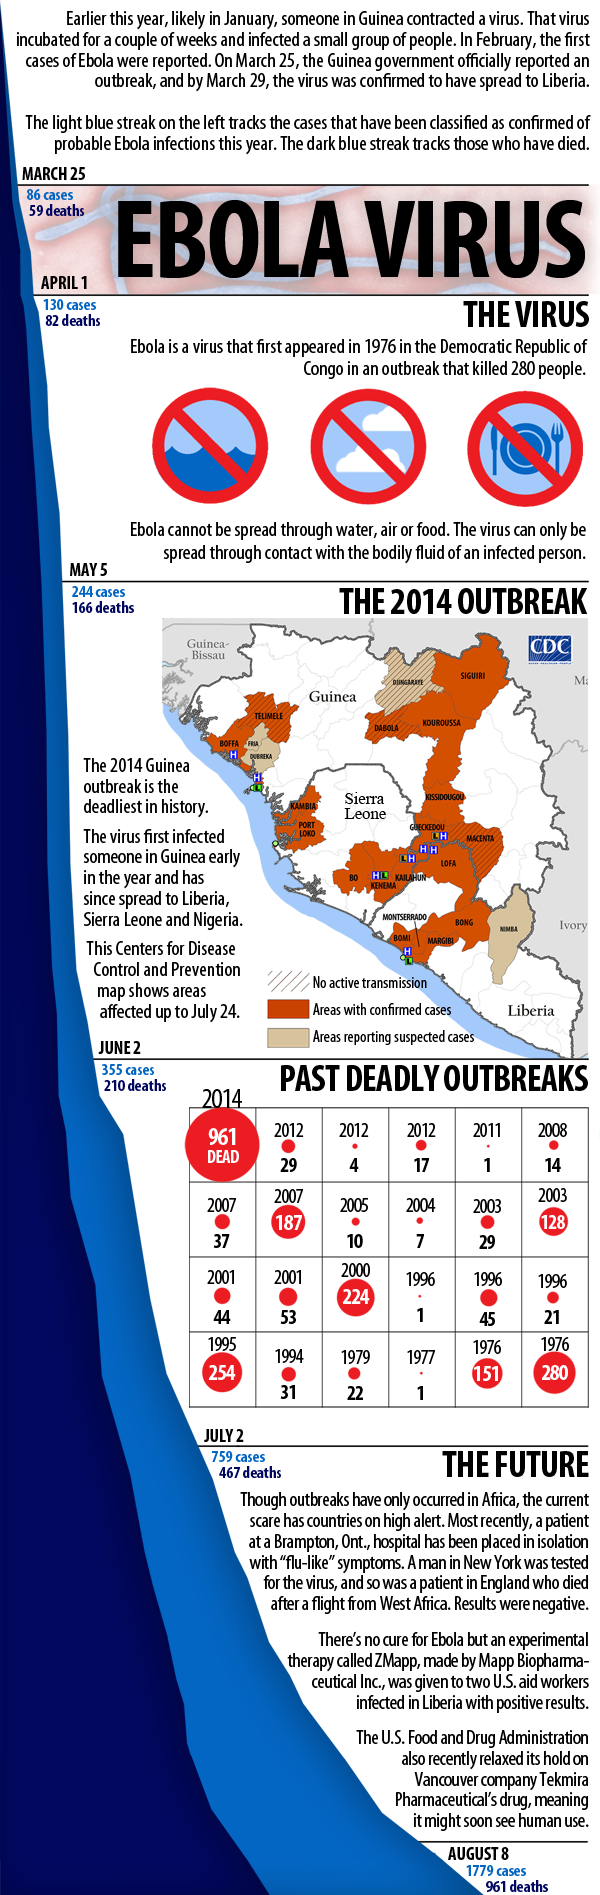 Ebola Infographic Update August 8